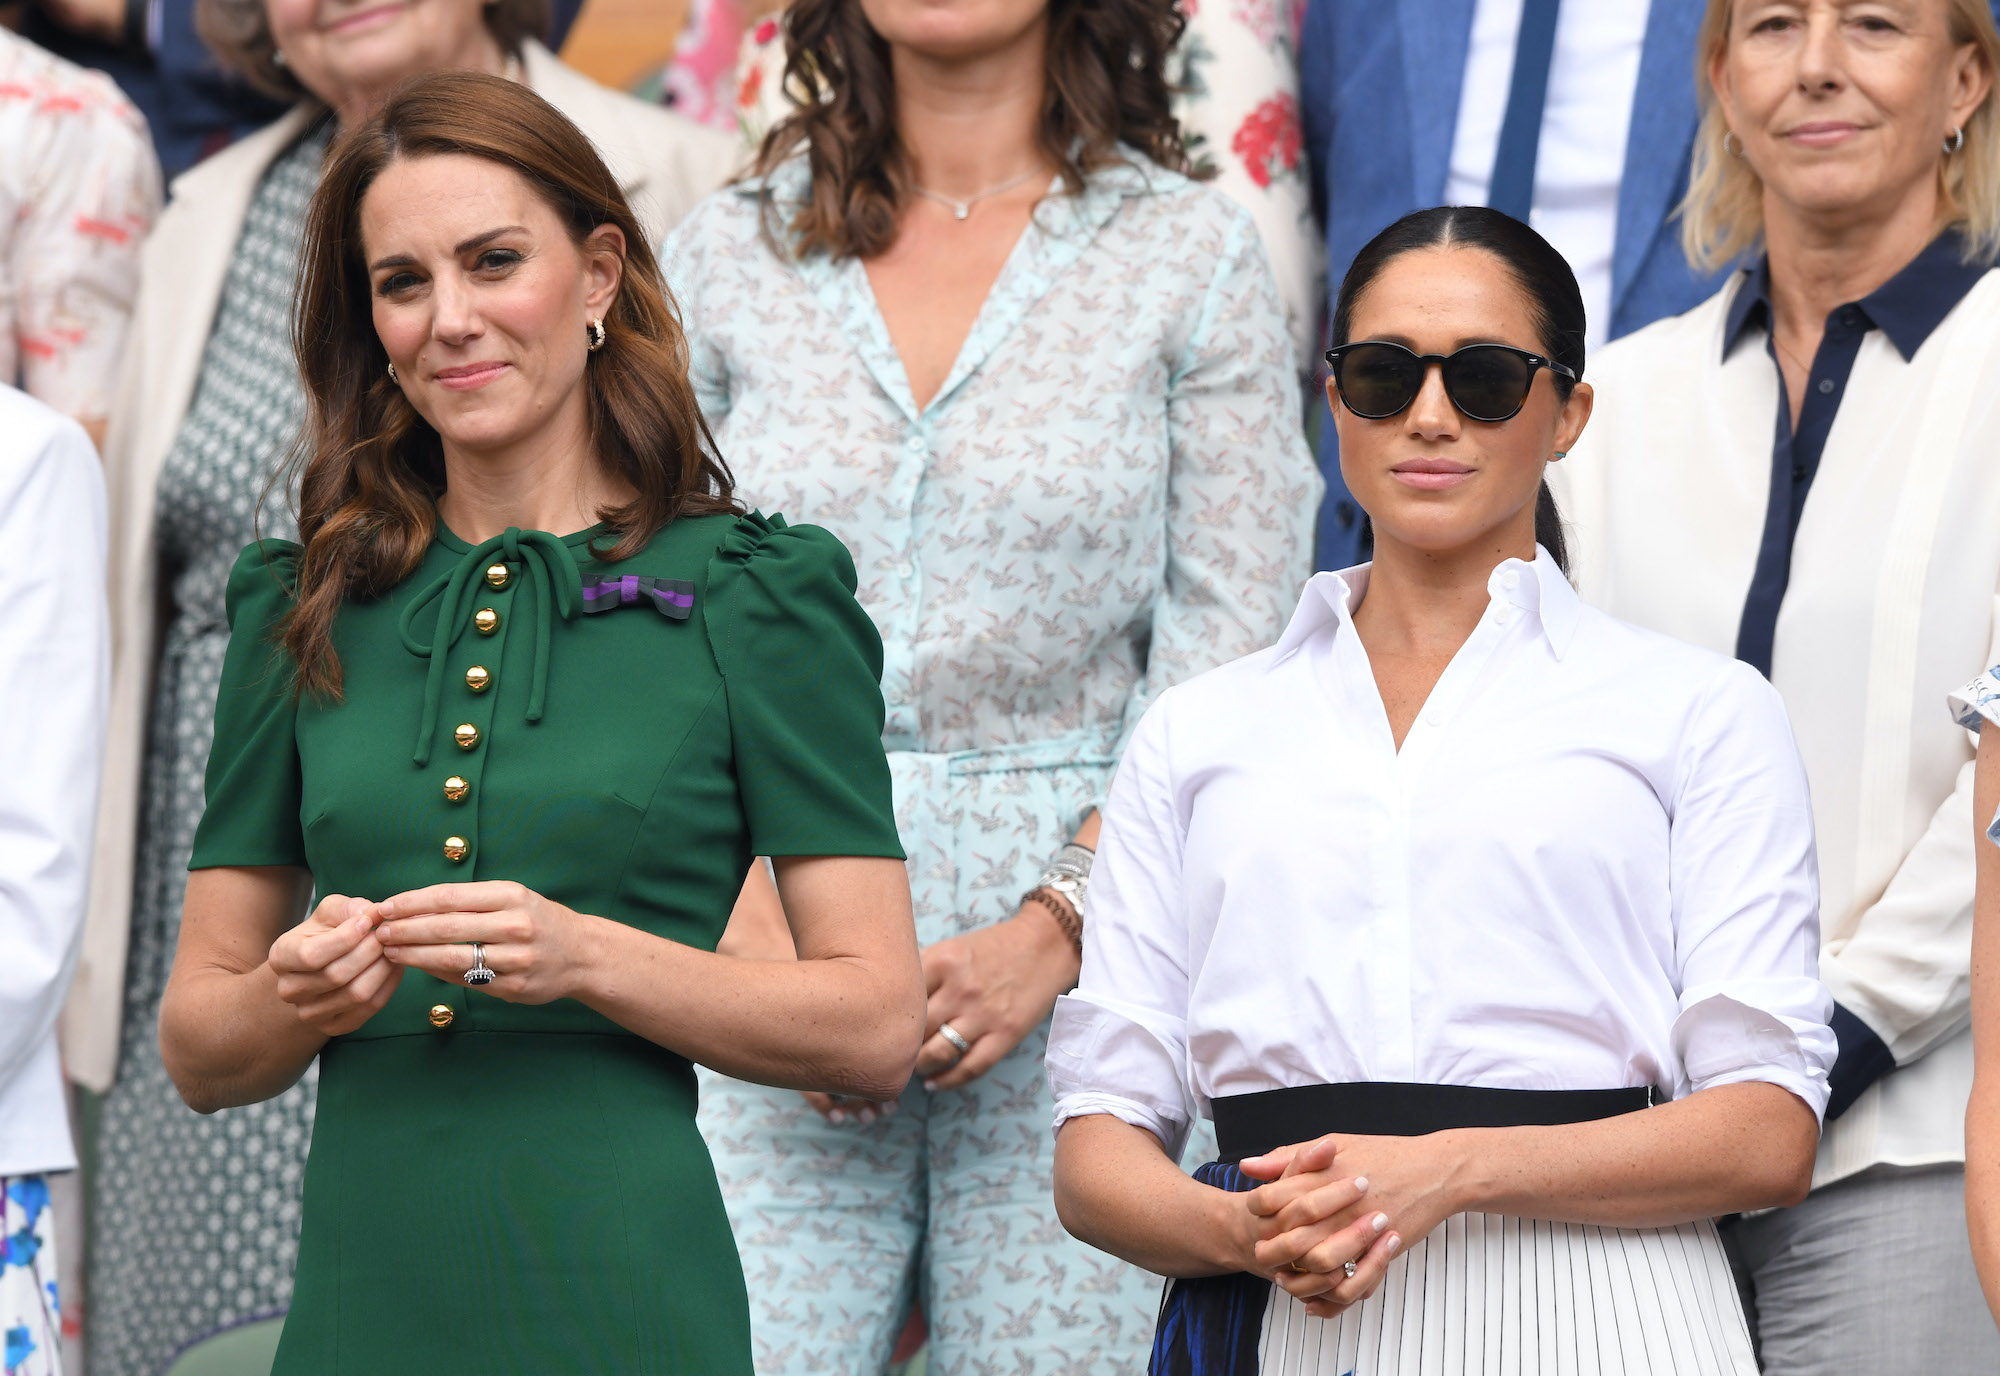 Why Meghan Markle and Kate Middleton Have Reportedly Not Spoken ‘Directly In Over a Year’